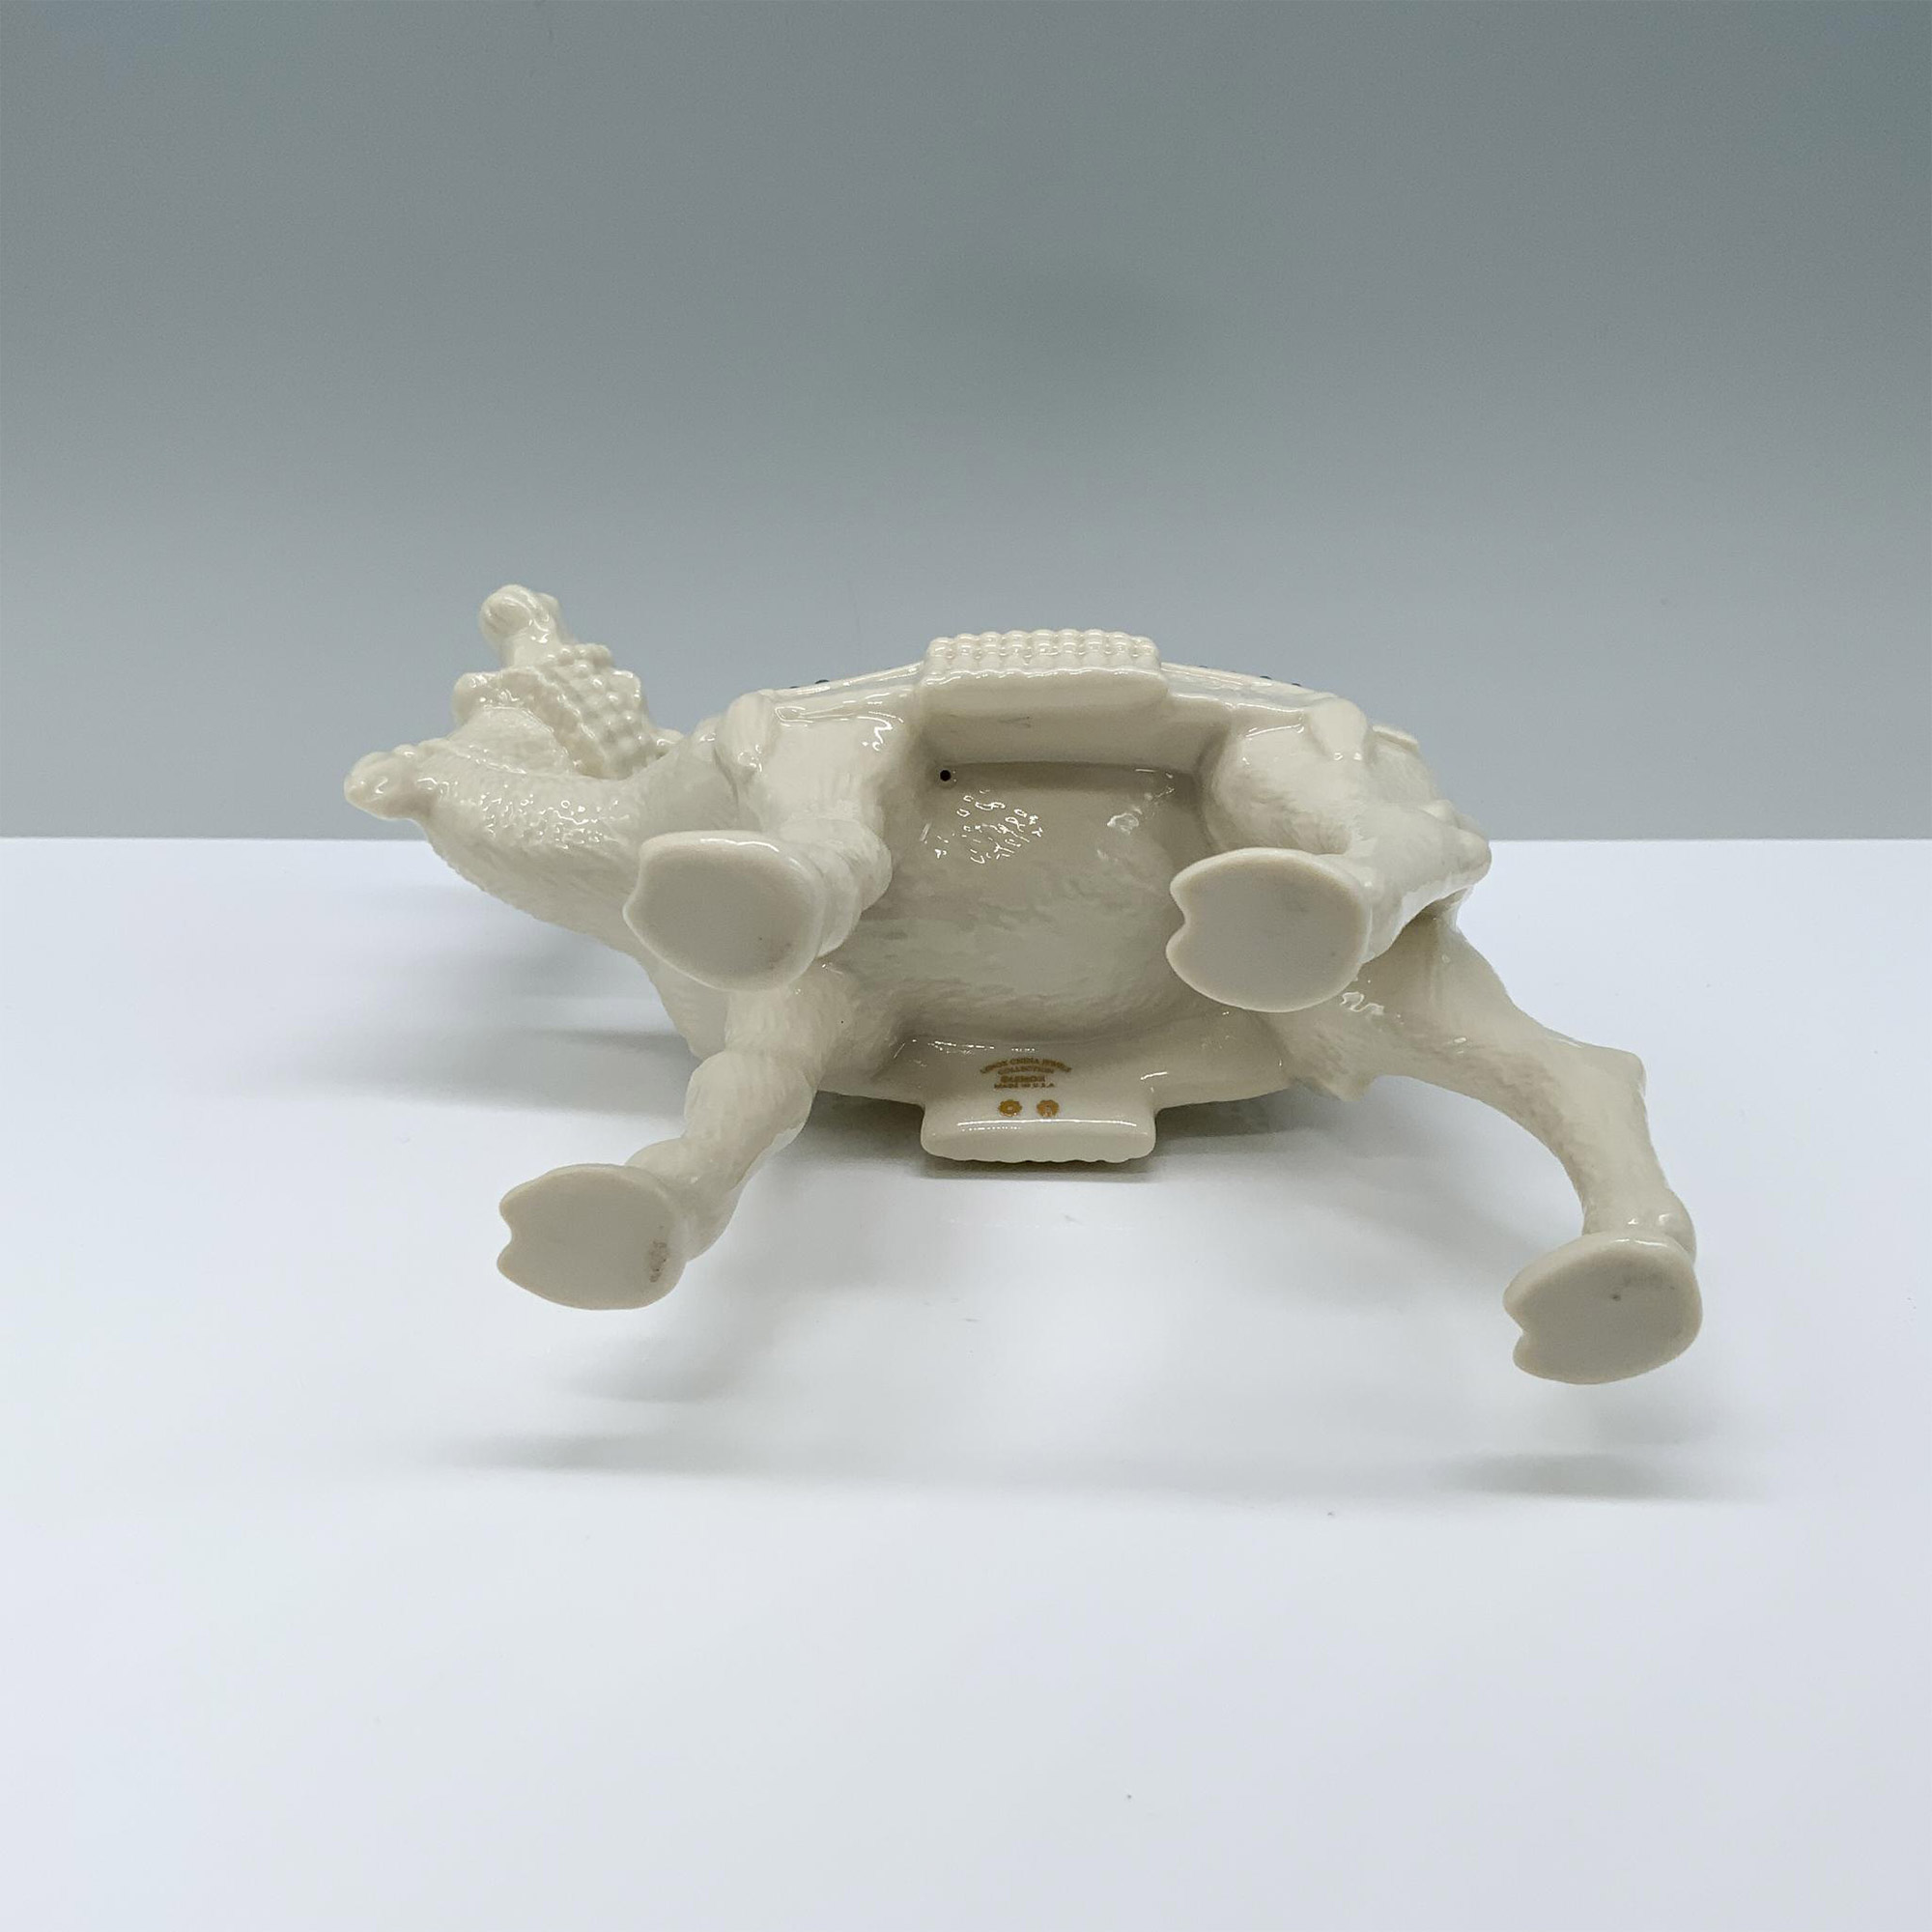 Lenox China Jewels Collection Figurine, Camel - Image 3 of 3